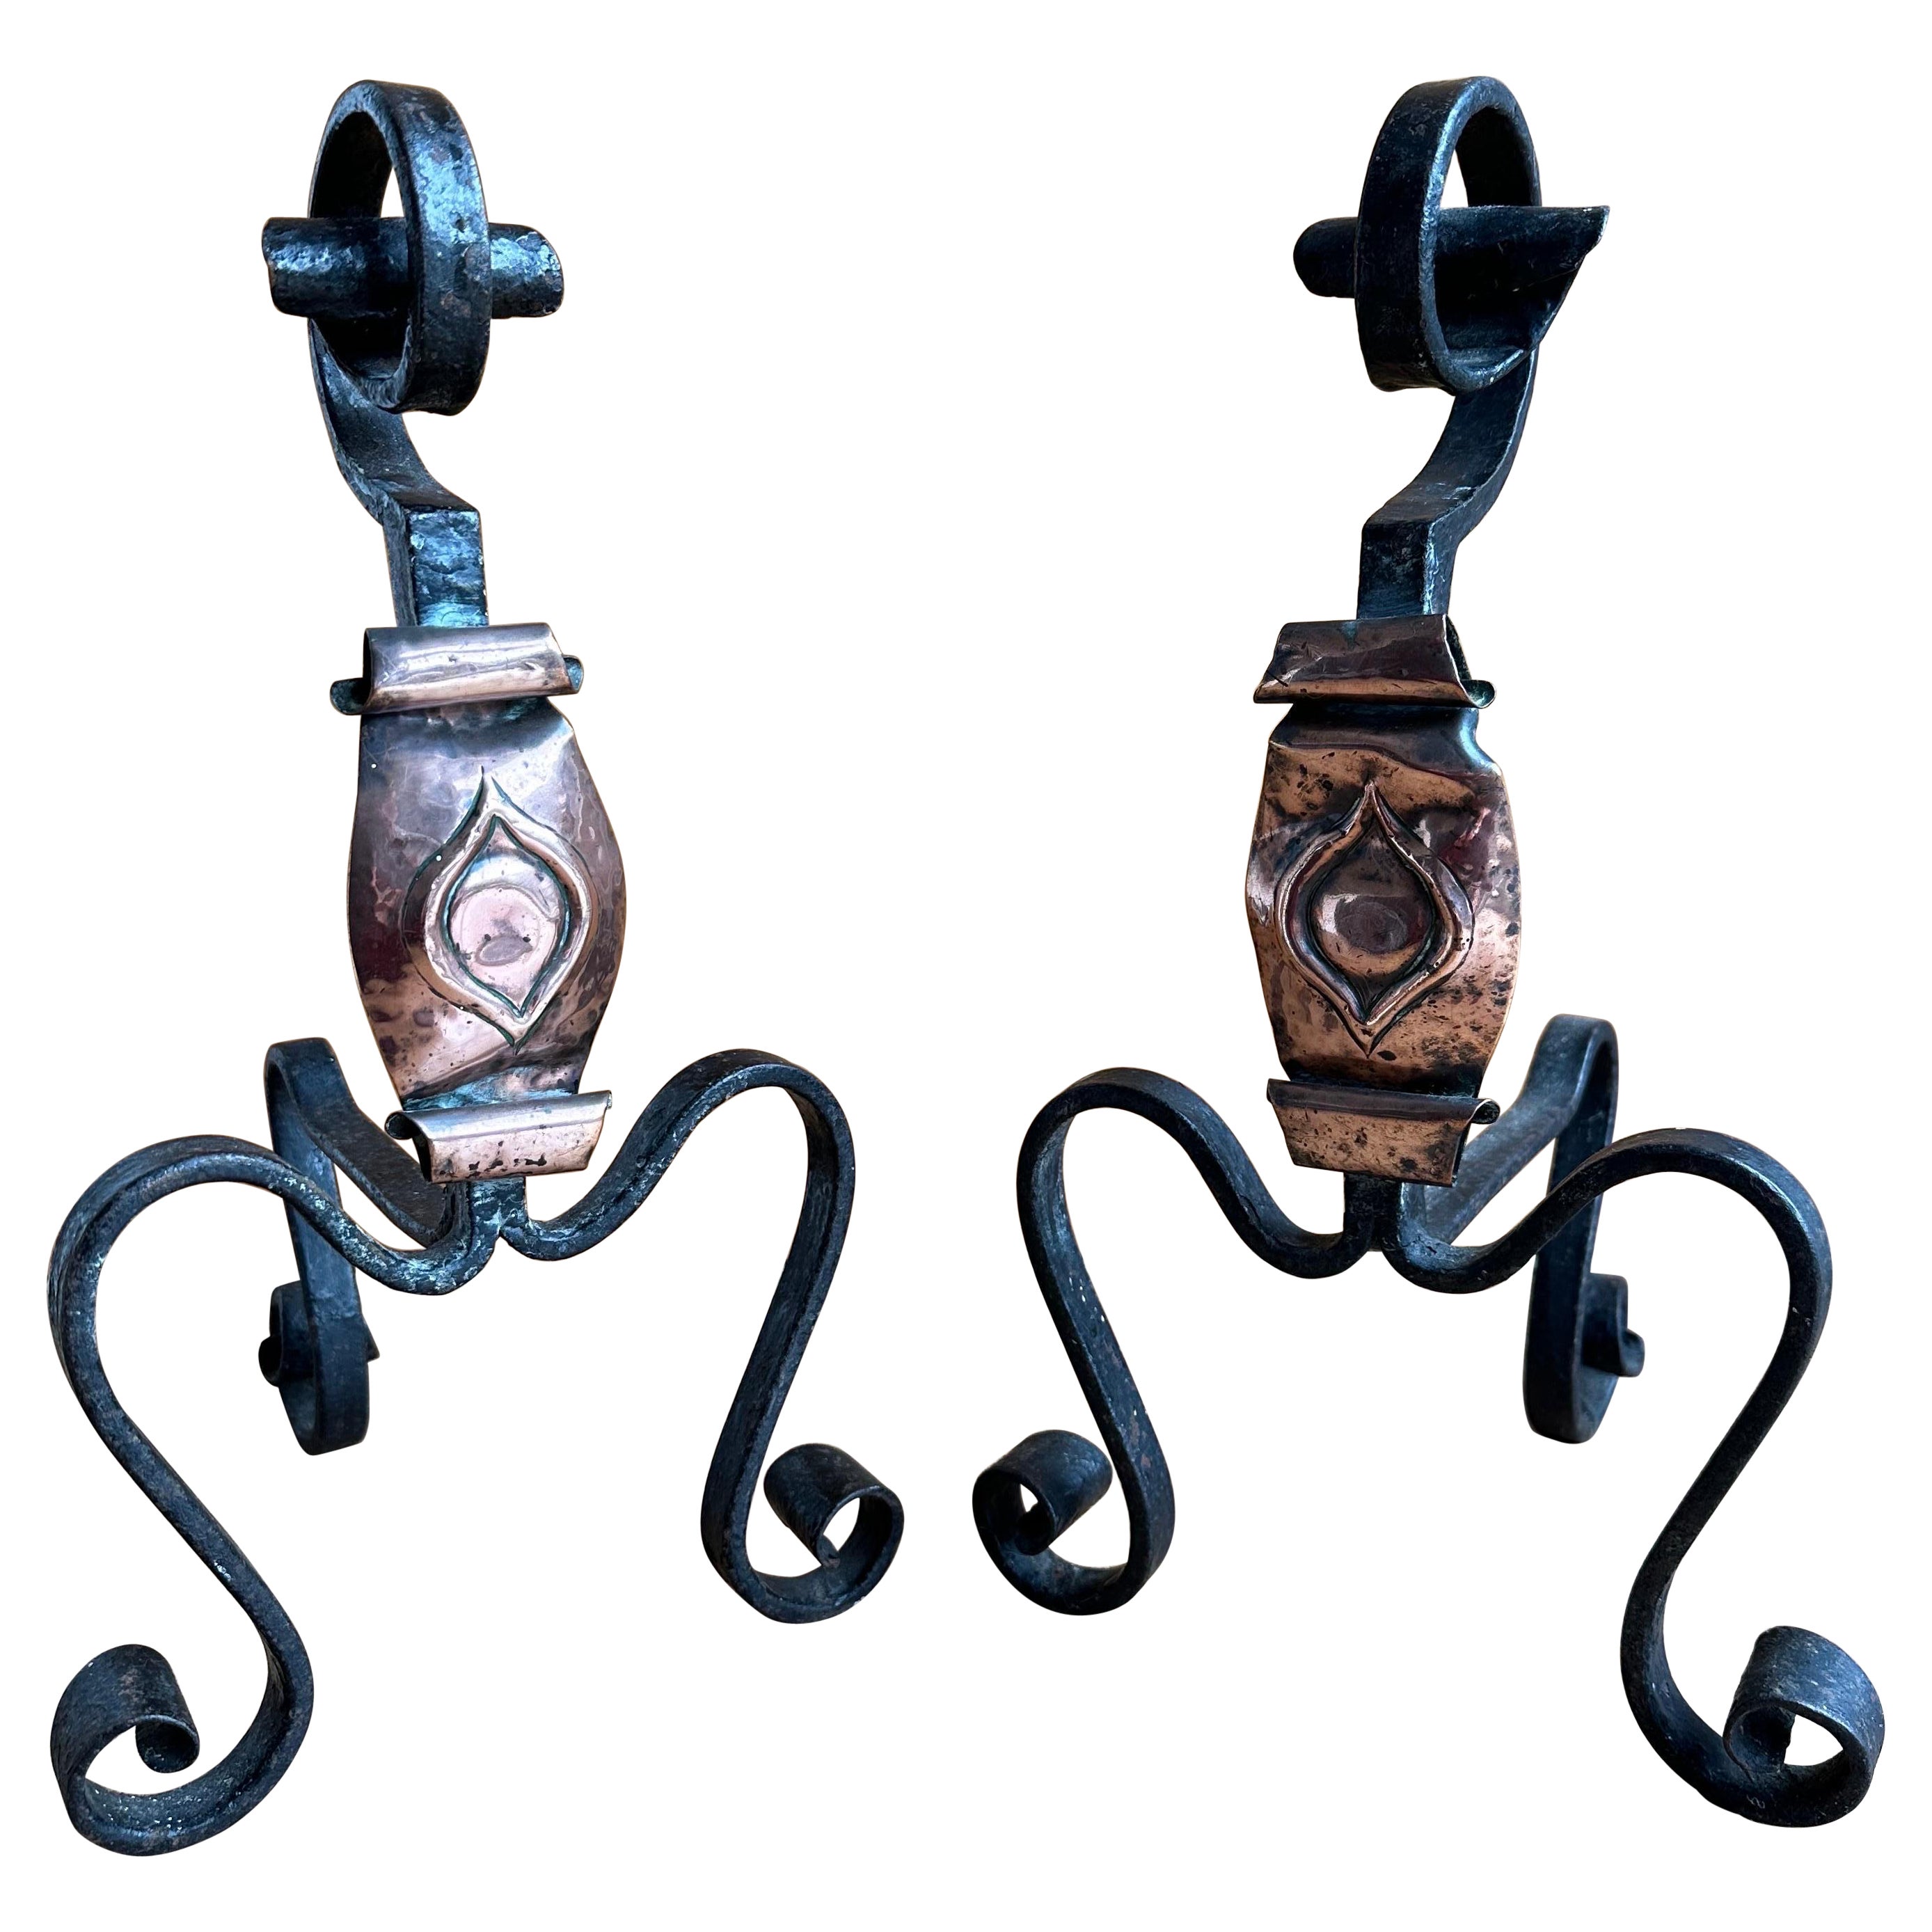 Handwrought Iron and Copper Gothic Fireplace Andirons Firedogs, 19th Century